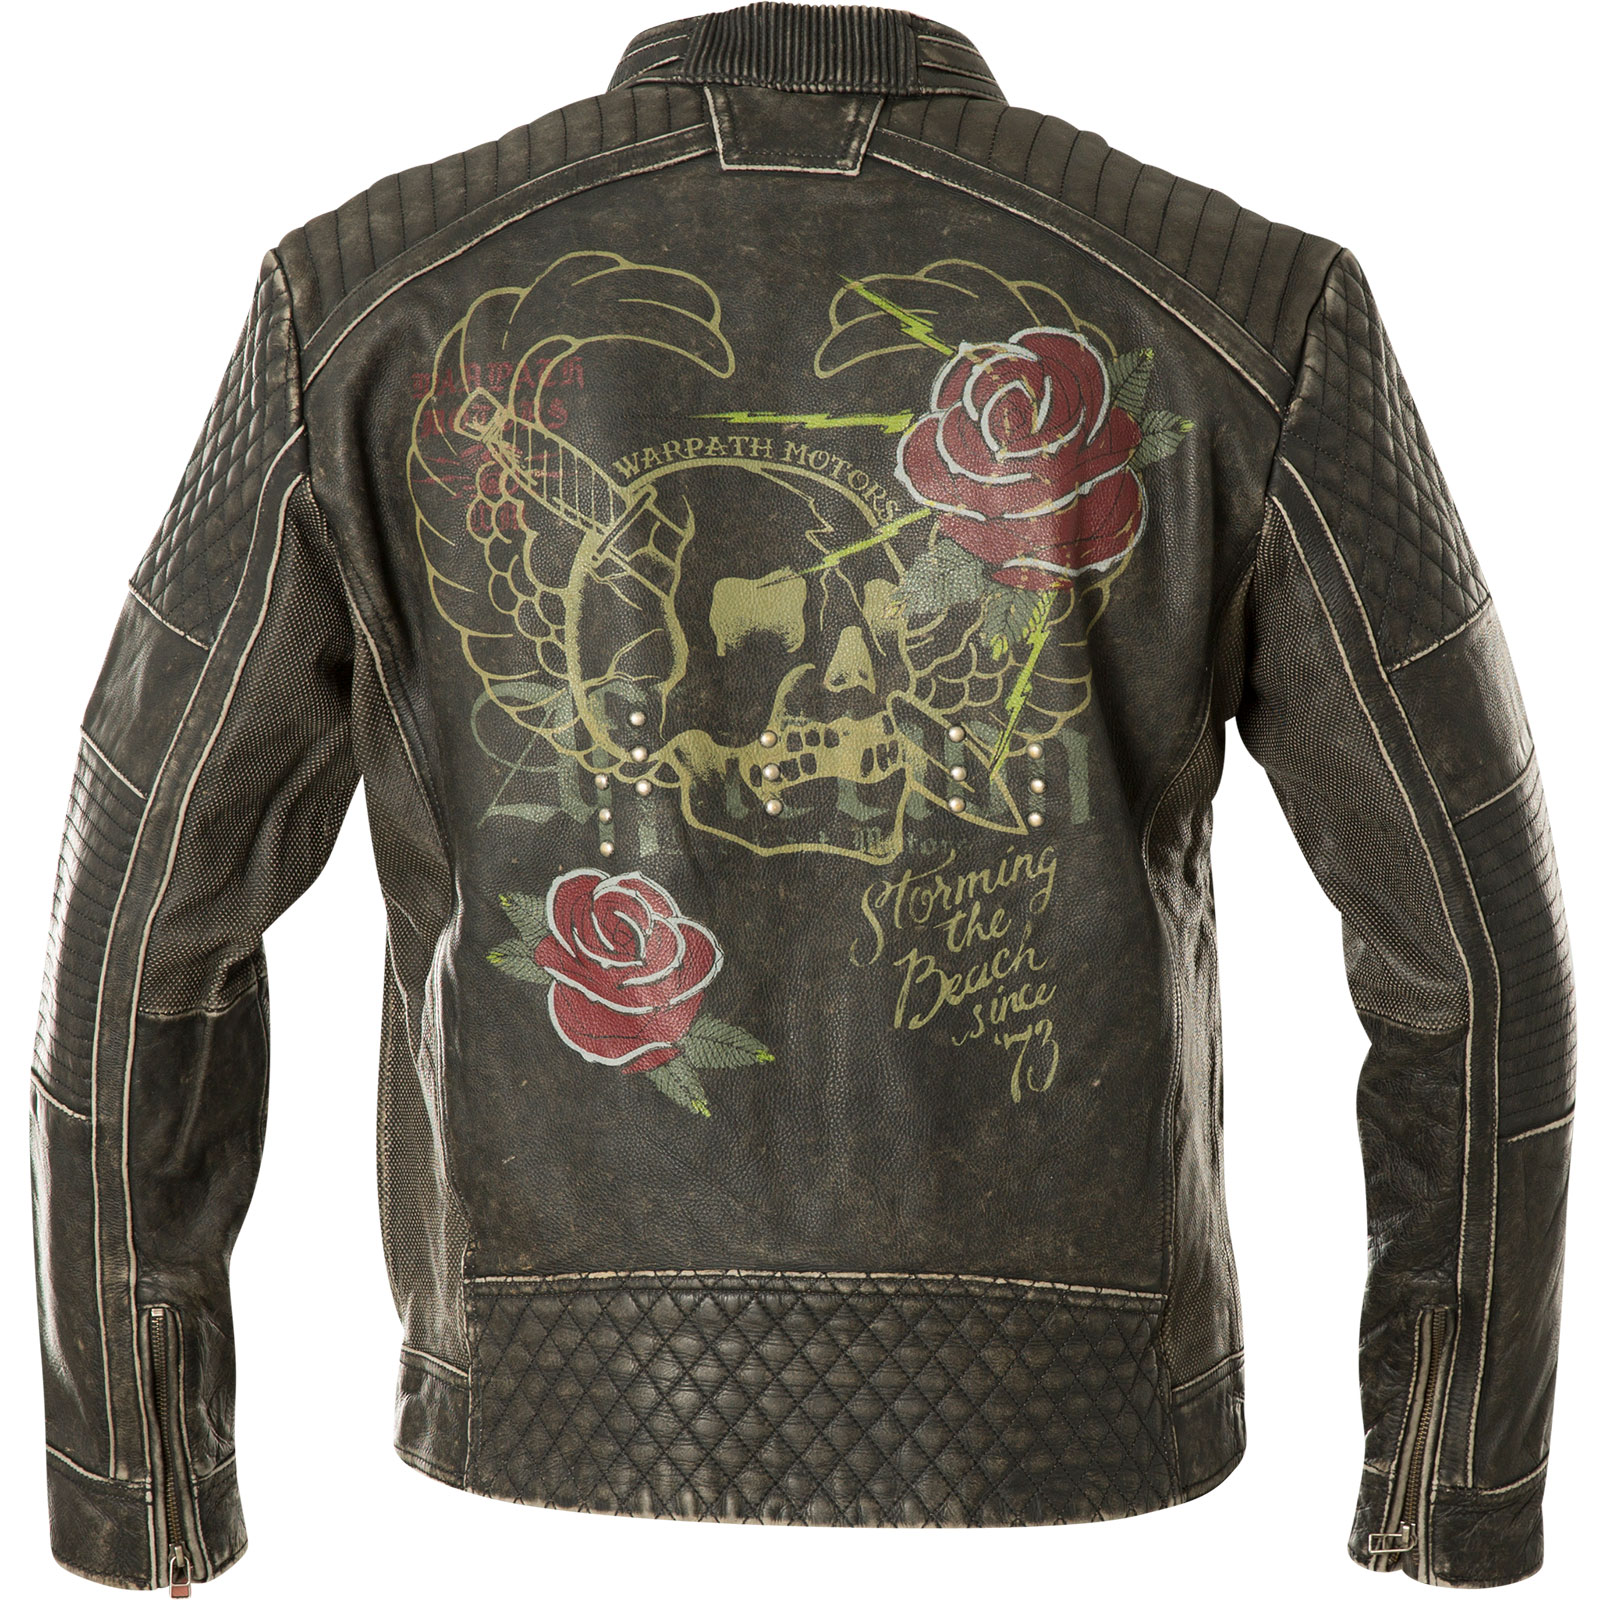 Affliction Fast Motors Jacket in biker style made from genuine leather